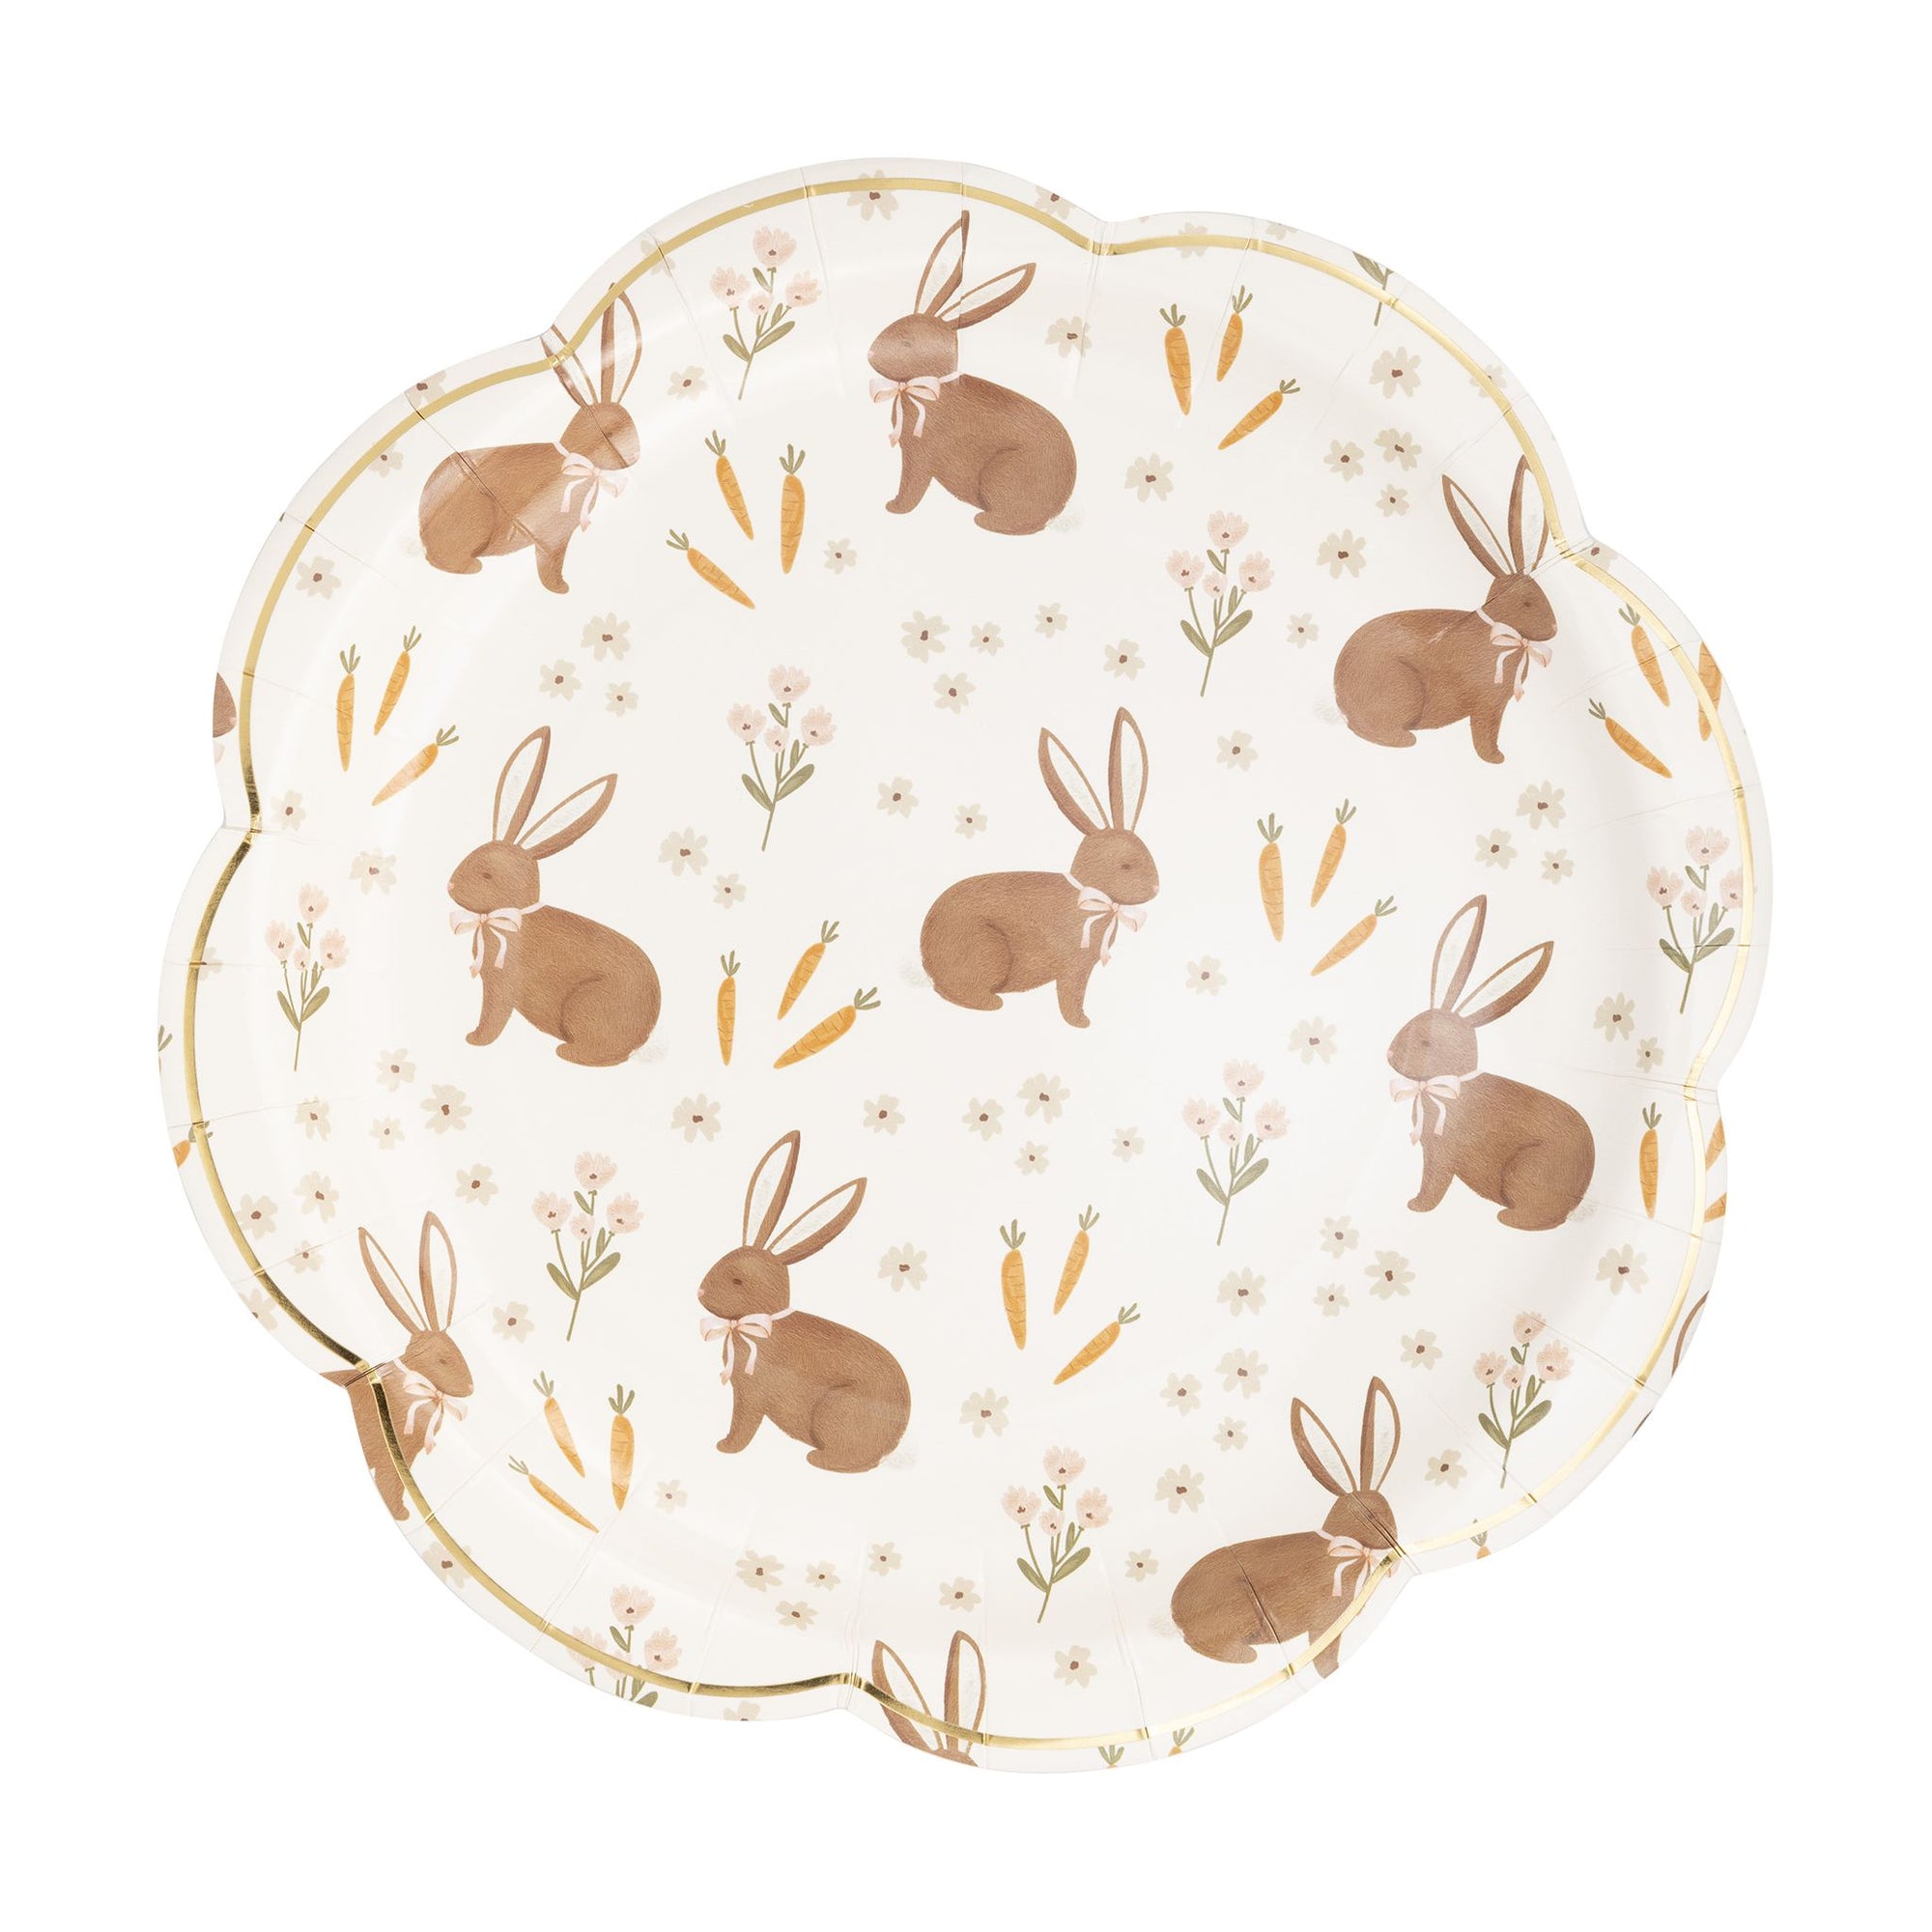 Rabbit Scatter Paper Plates - The Preppy Bunny